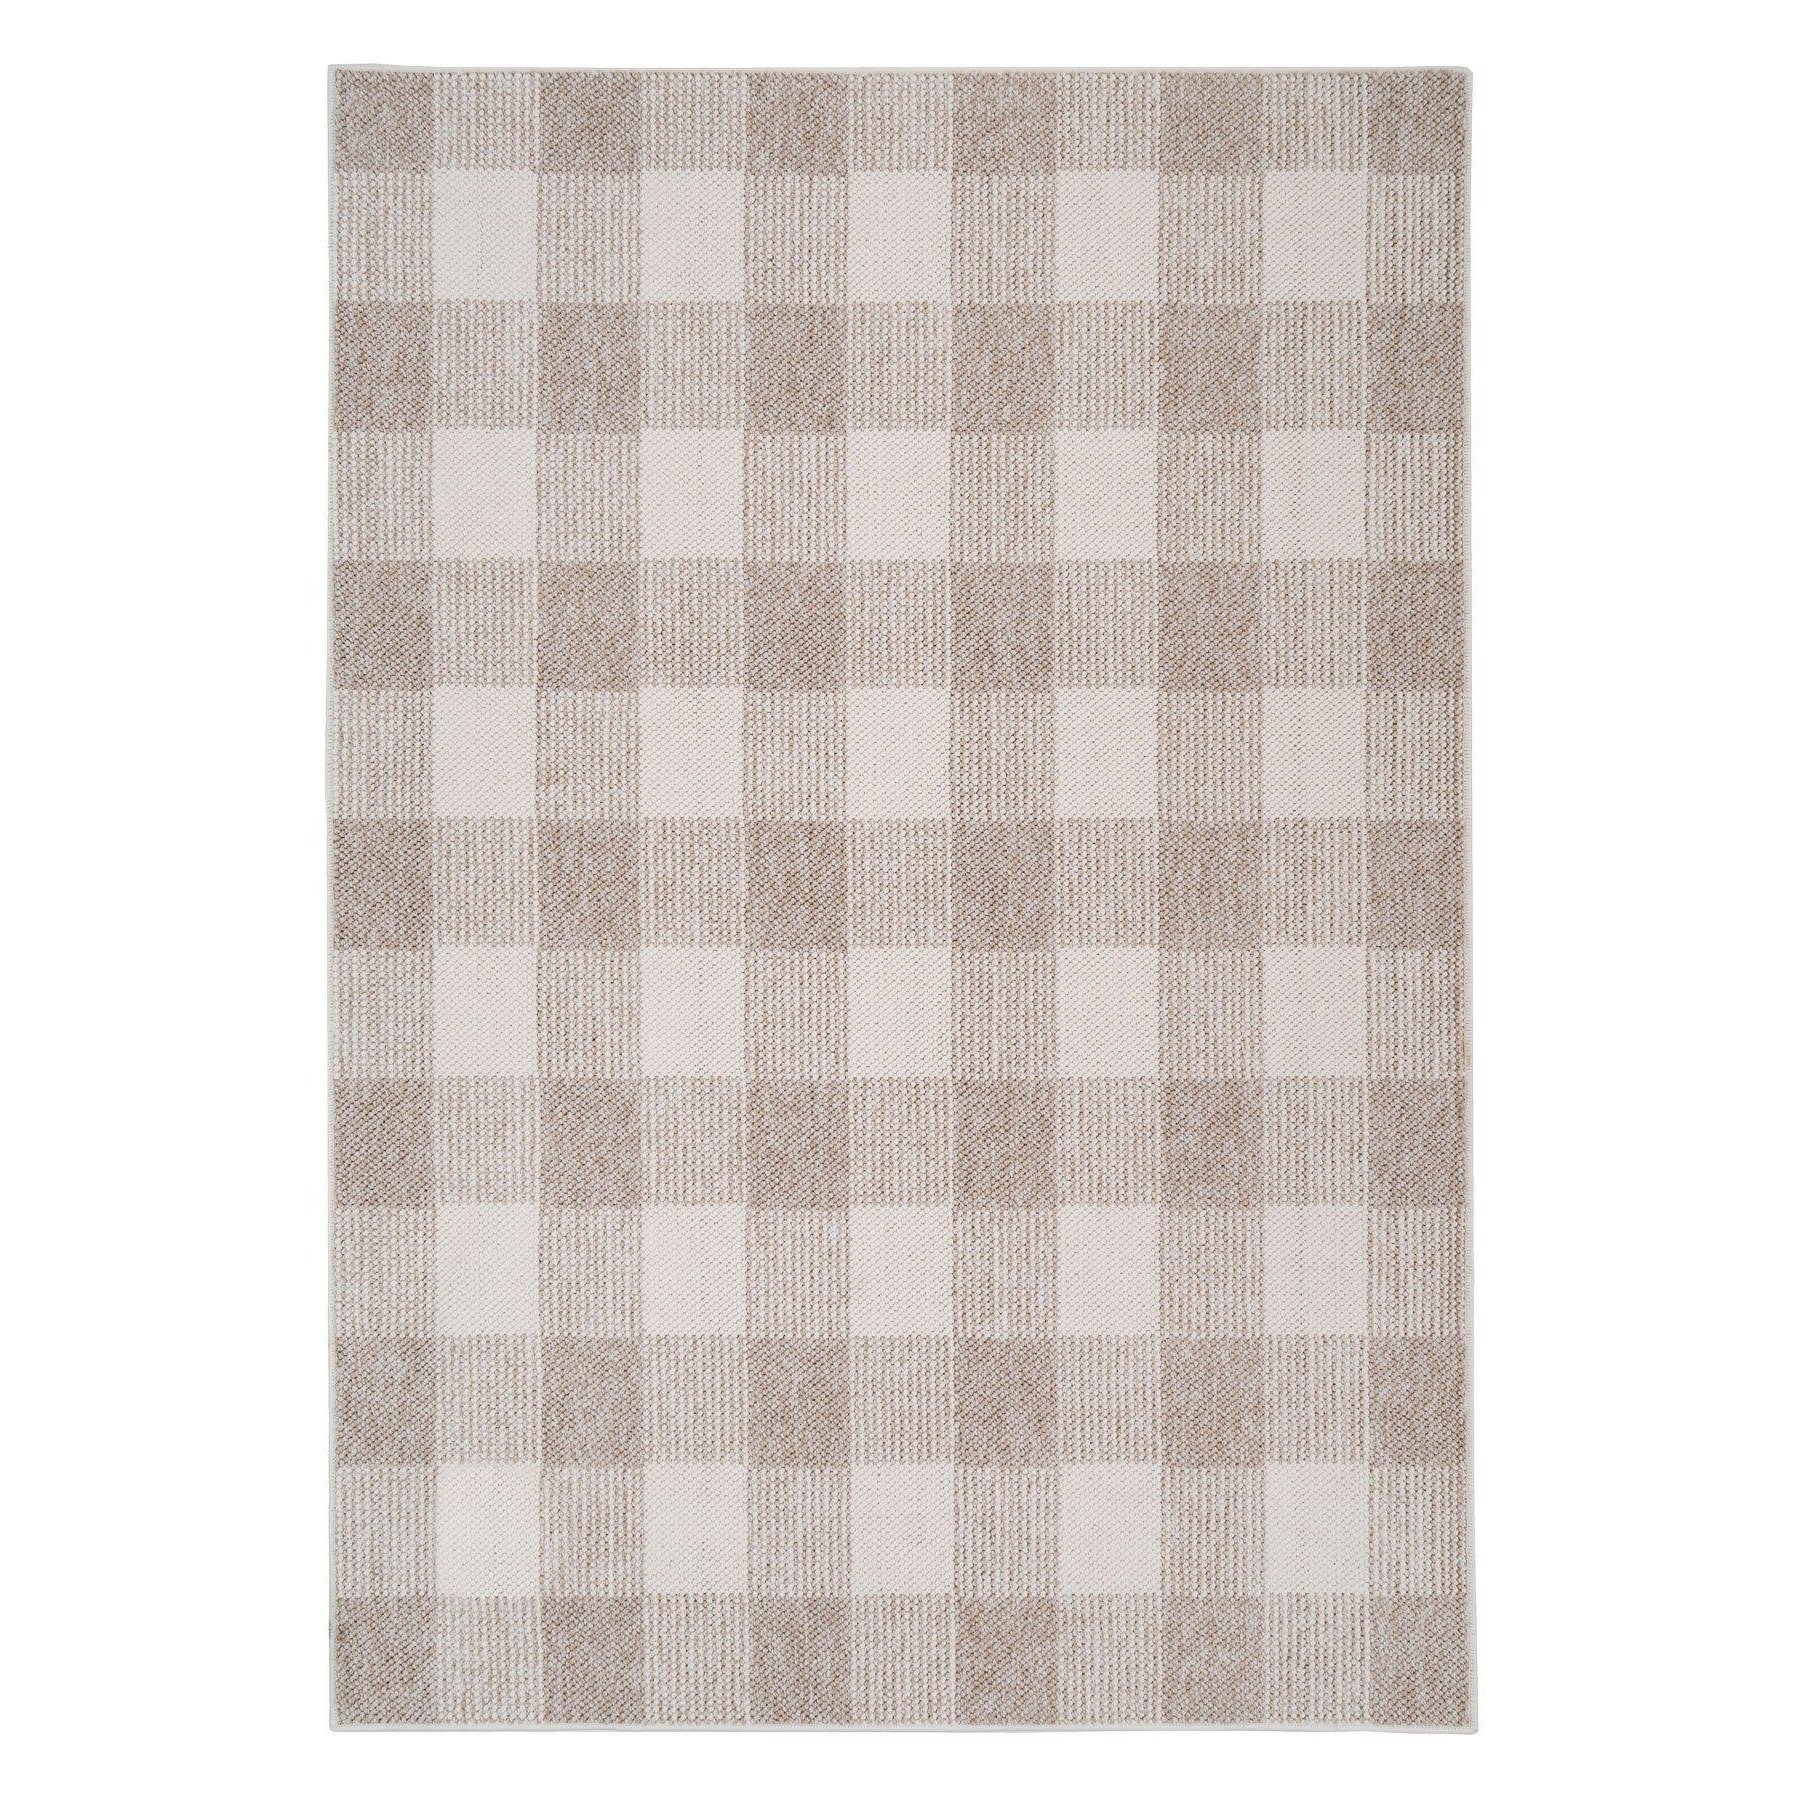 Neutral Cream Beige Boucle Textured Checkered Soft Area Rug - image 1